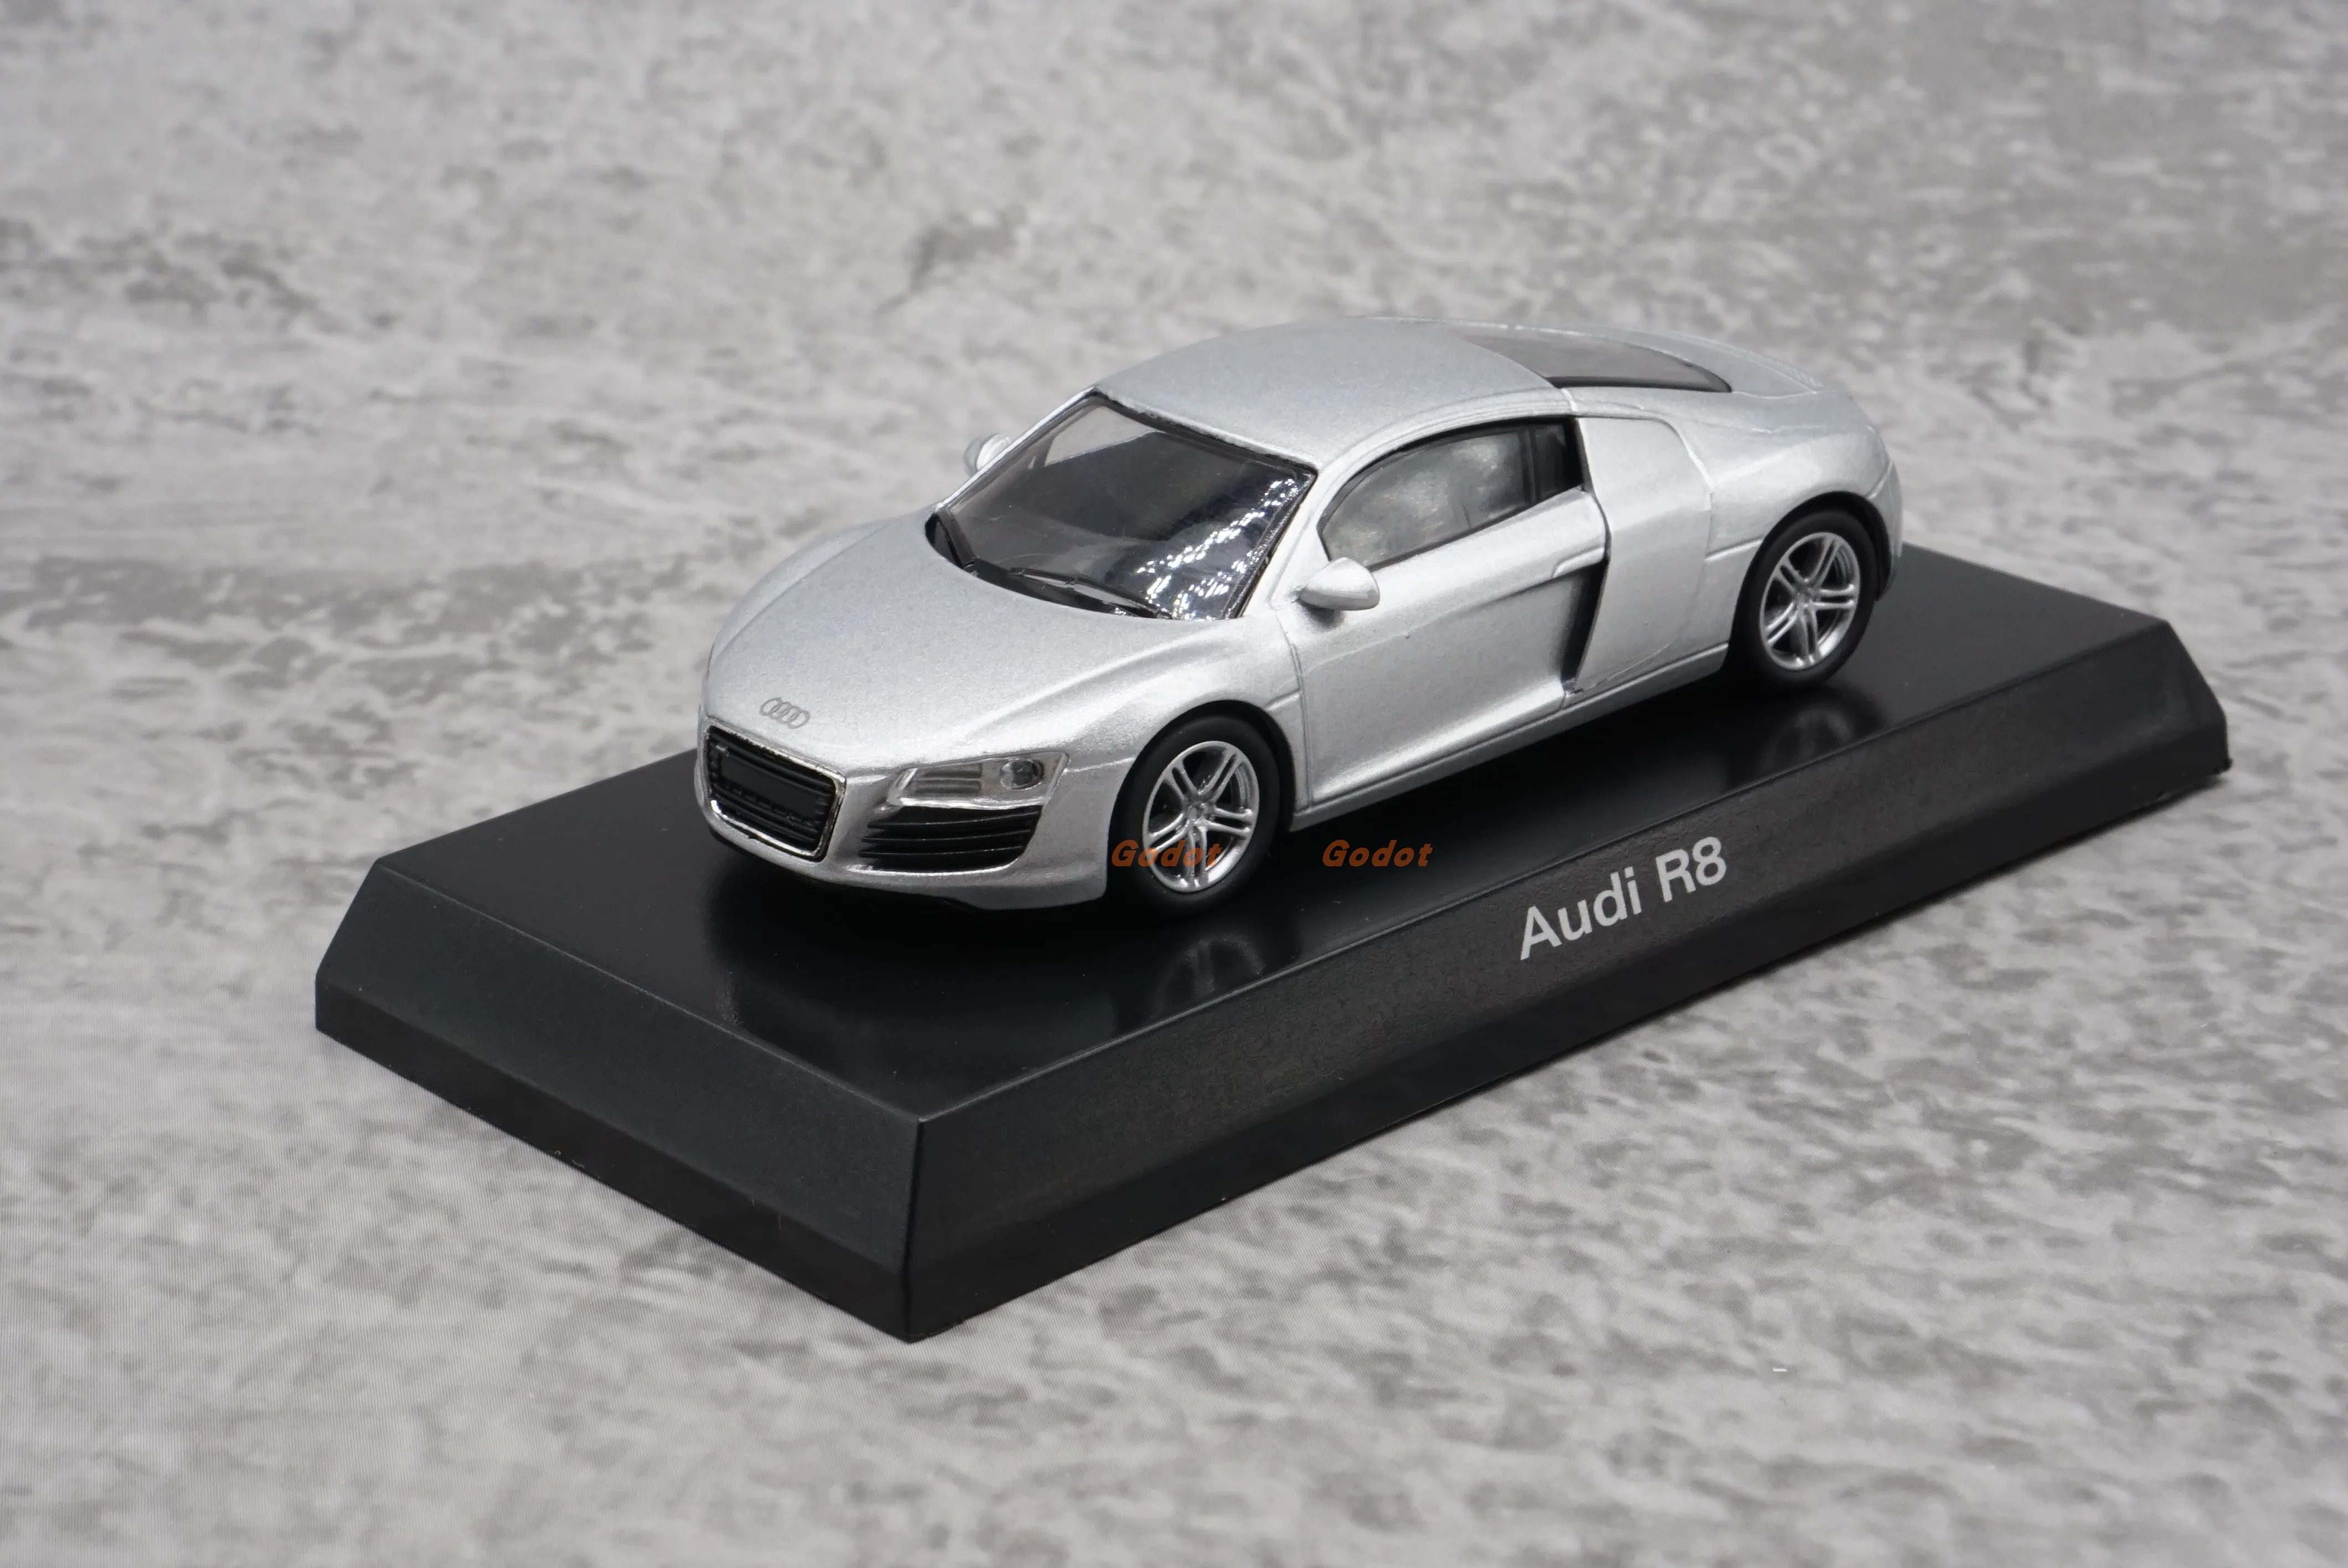 

KYOSHO 1:64 Audi R8 Alloy car model Furnishing articles collection